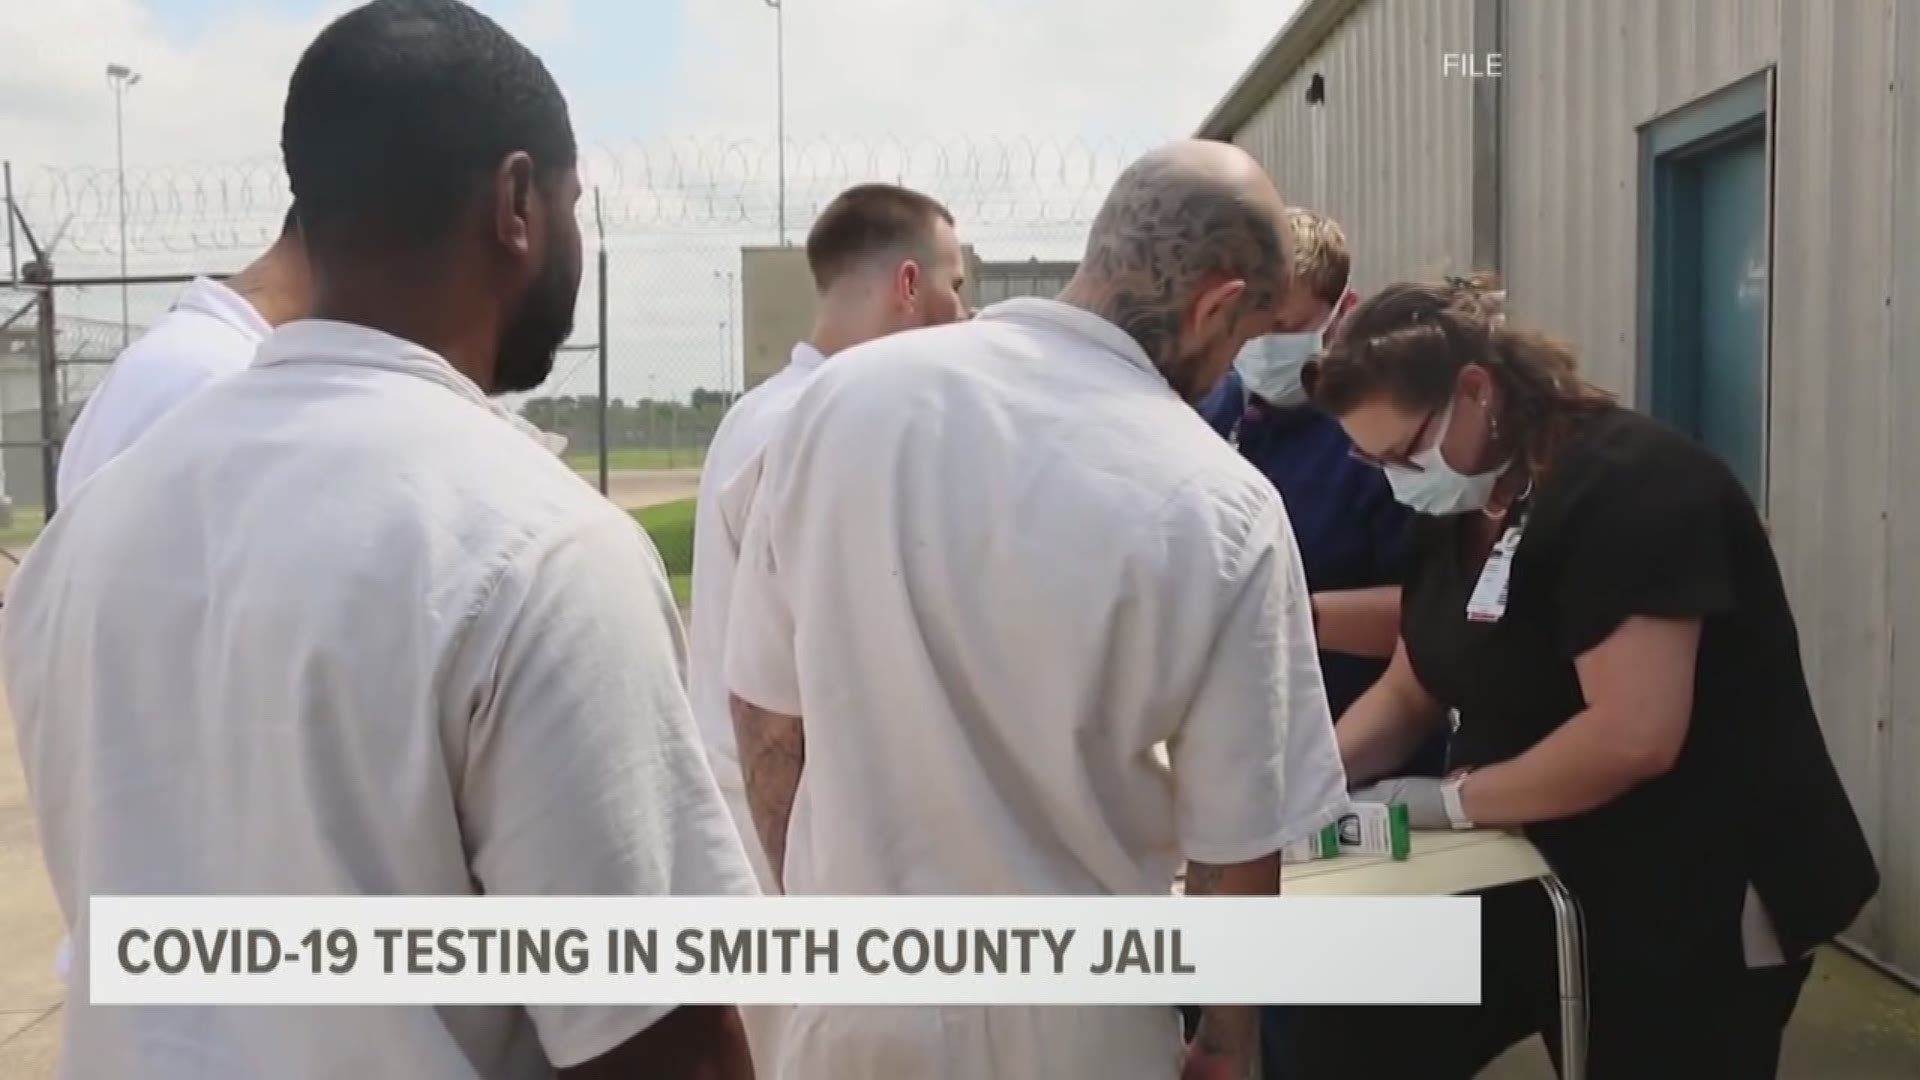 COVID19 testing at Smith County Jail; inmates may have to wait for